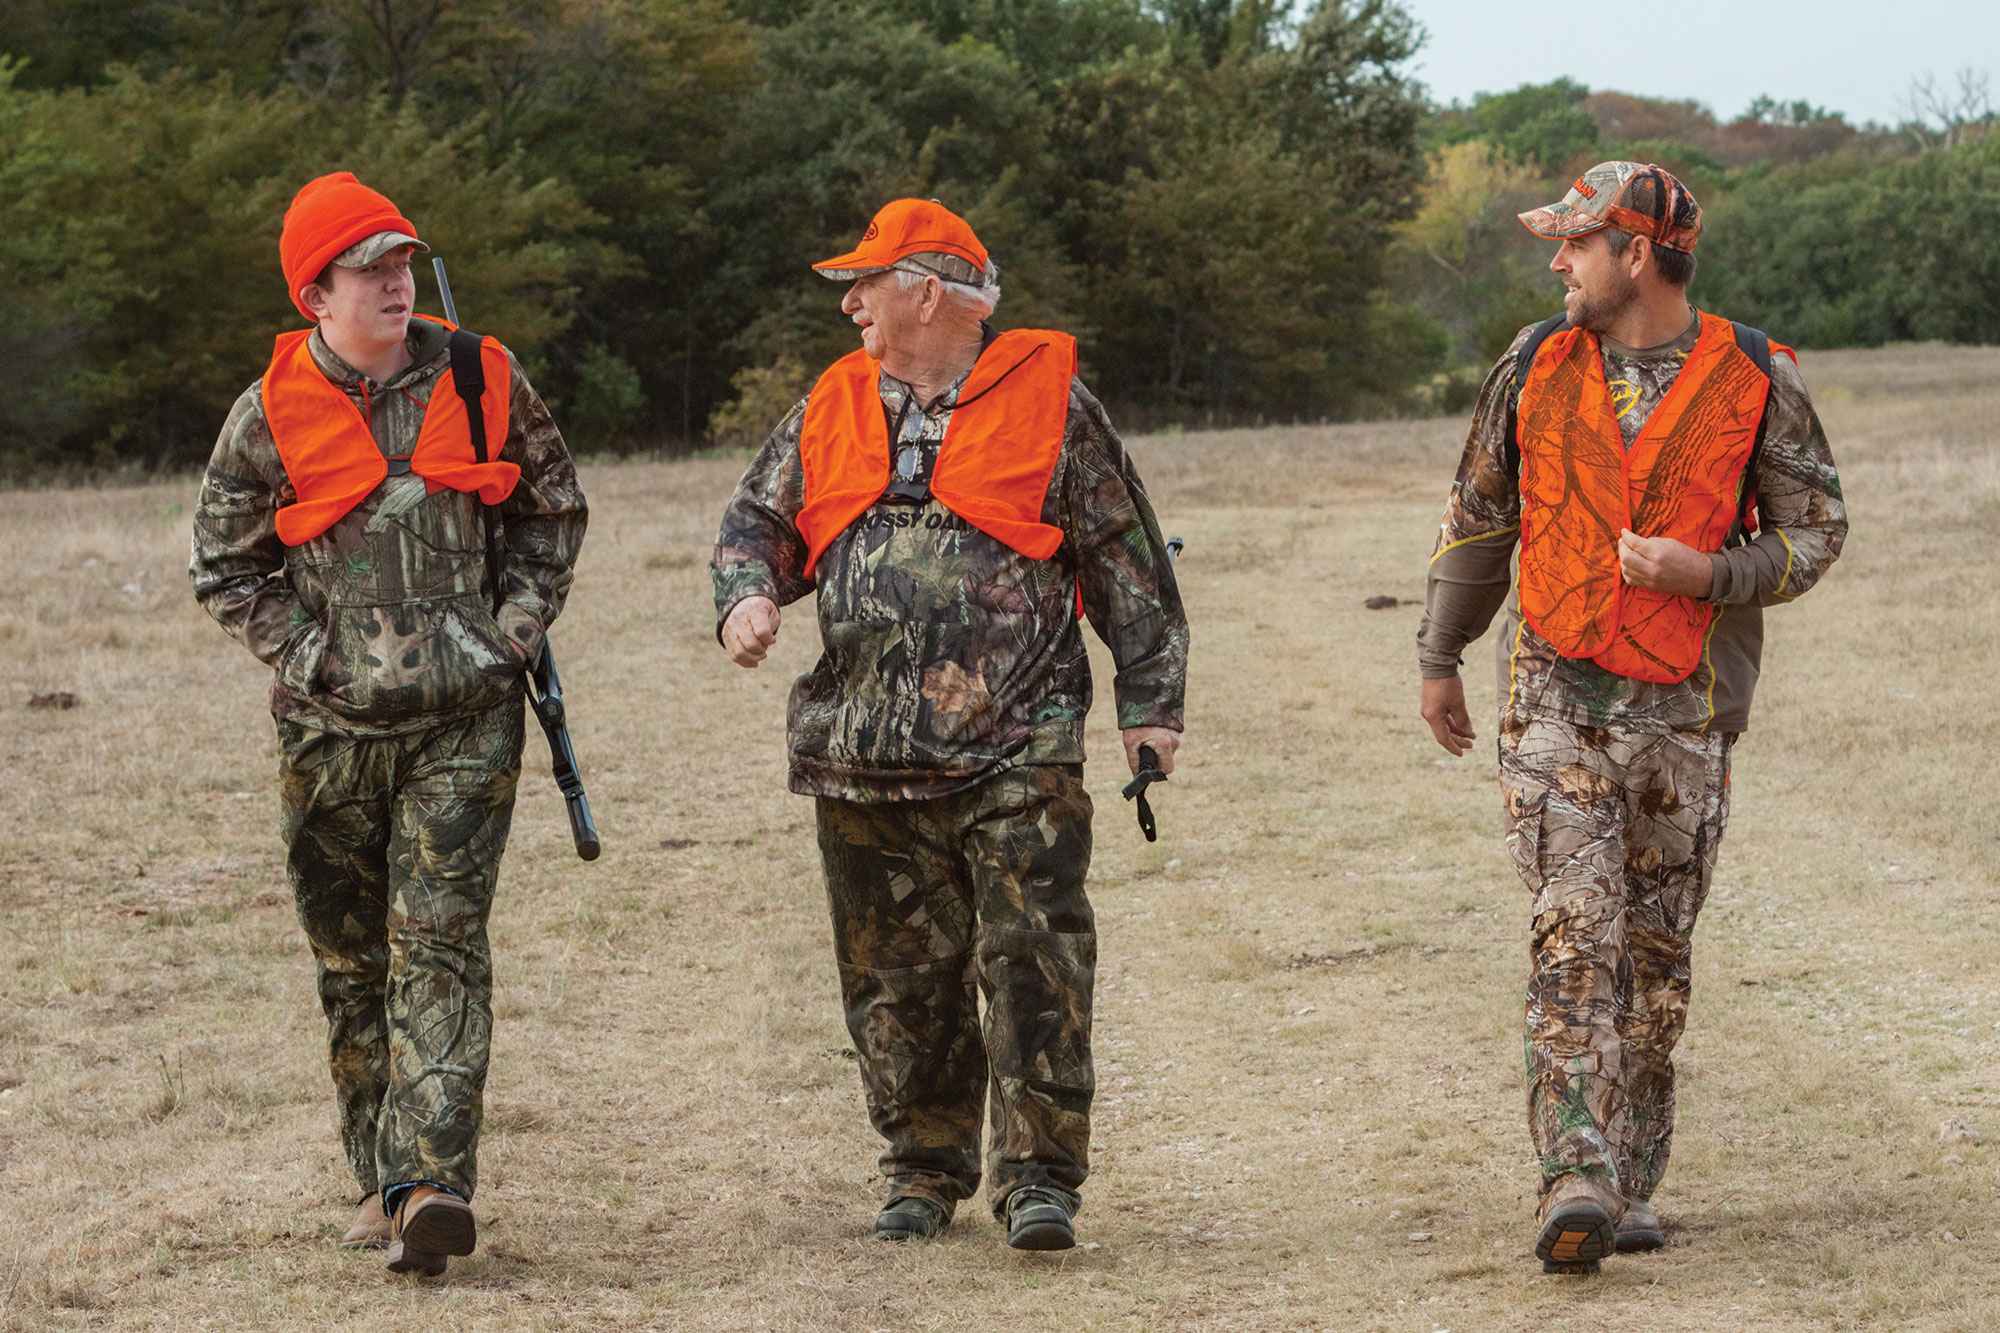 Hunters in camoflage and orange safety vests.